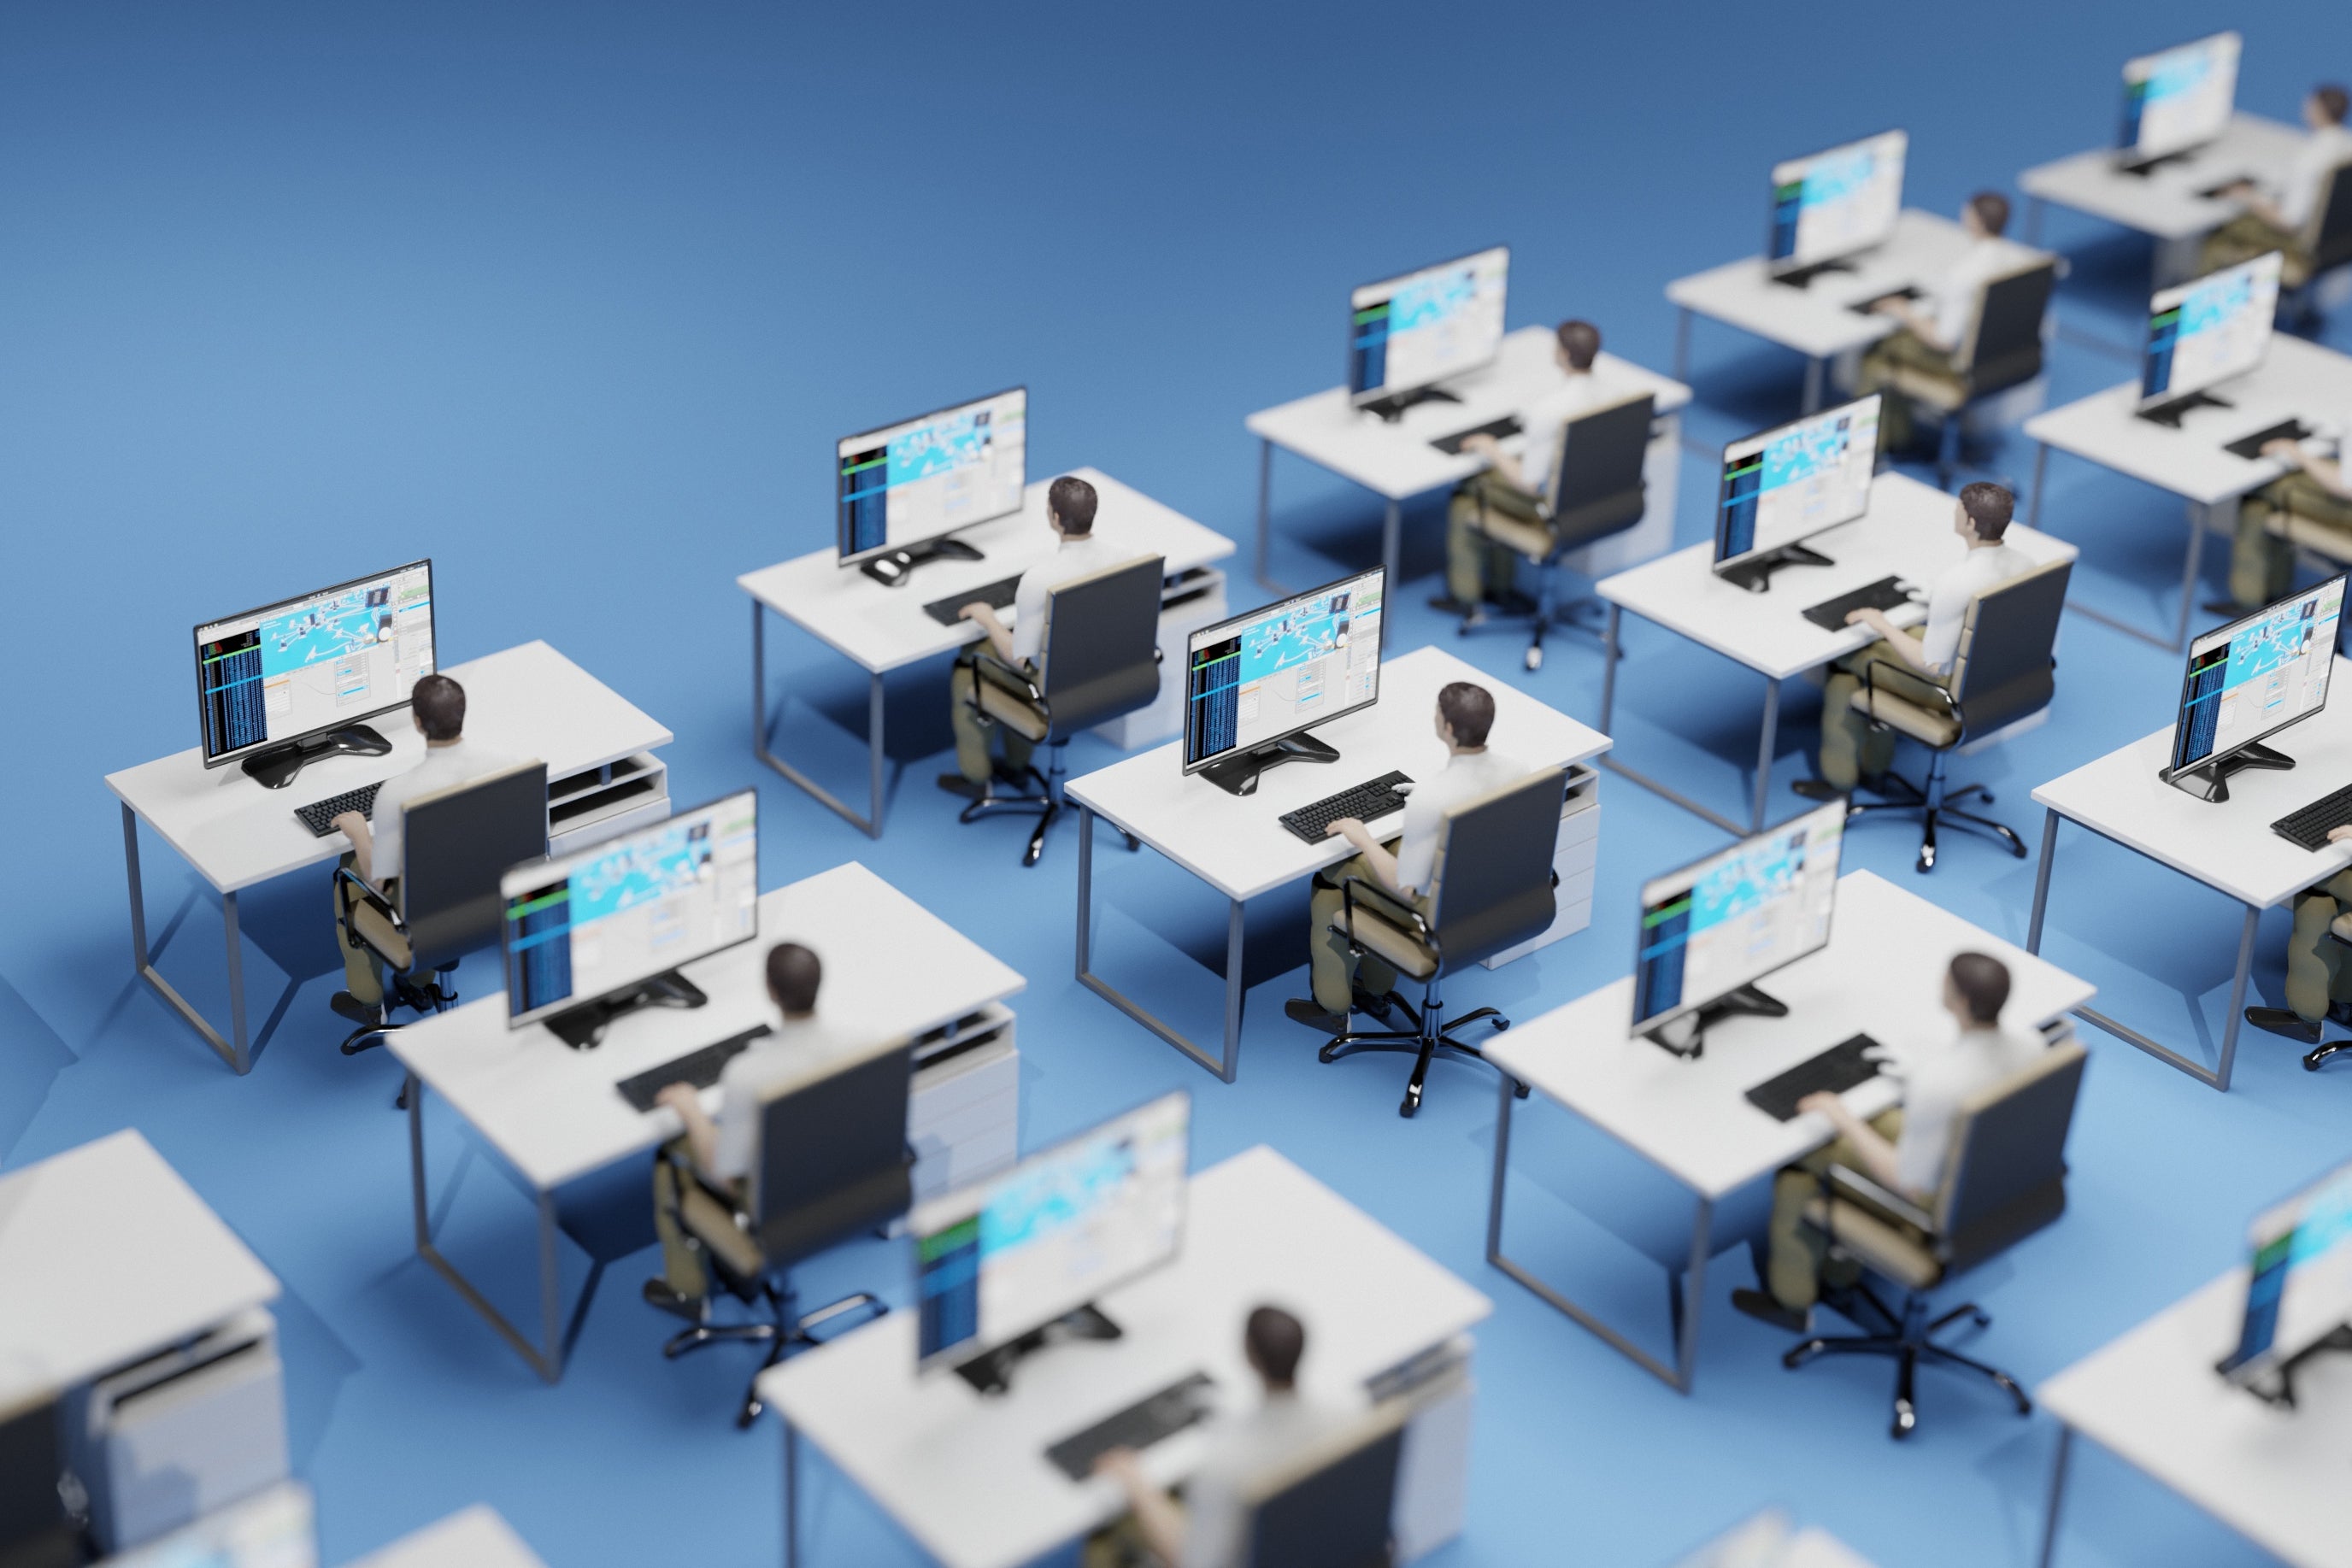 Digital 3D artist's illustration of office workers sitting at their identical desks in an isometric grid slightly from above